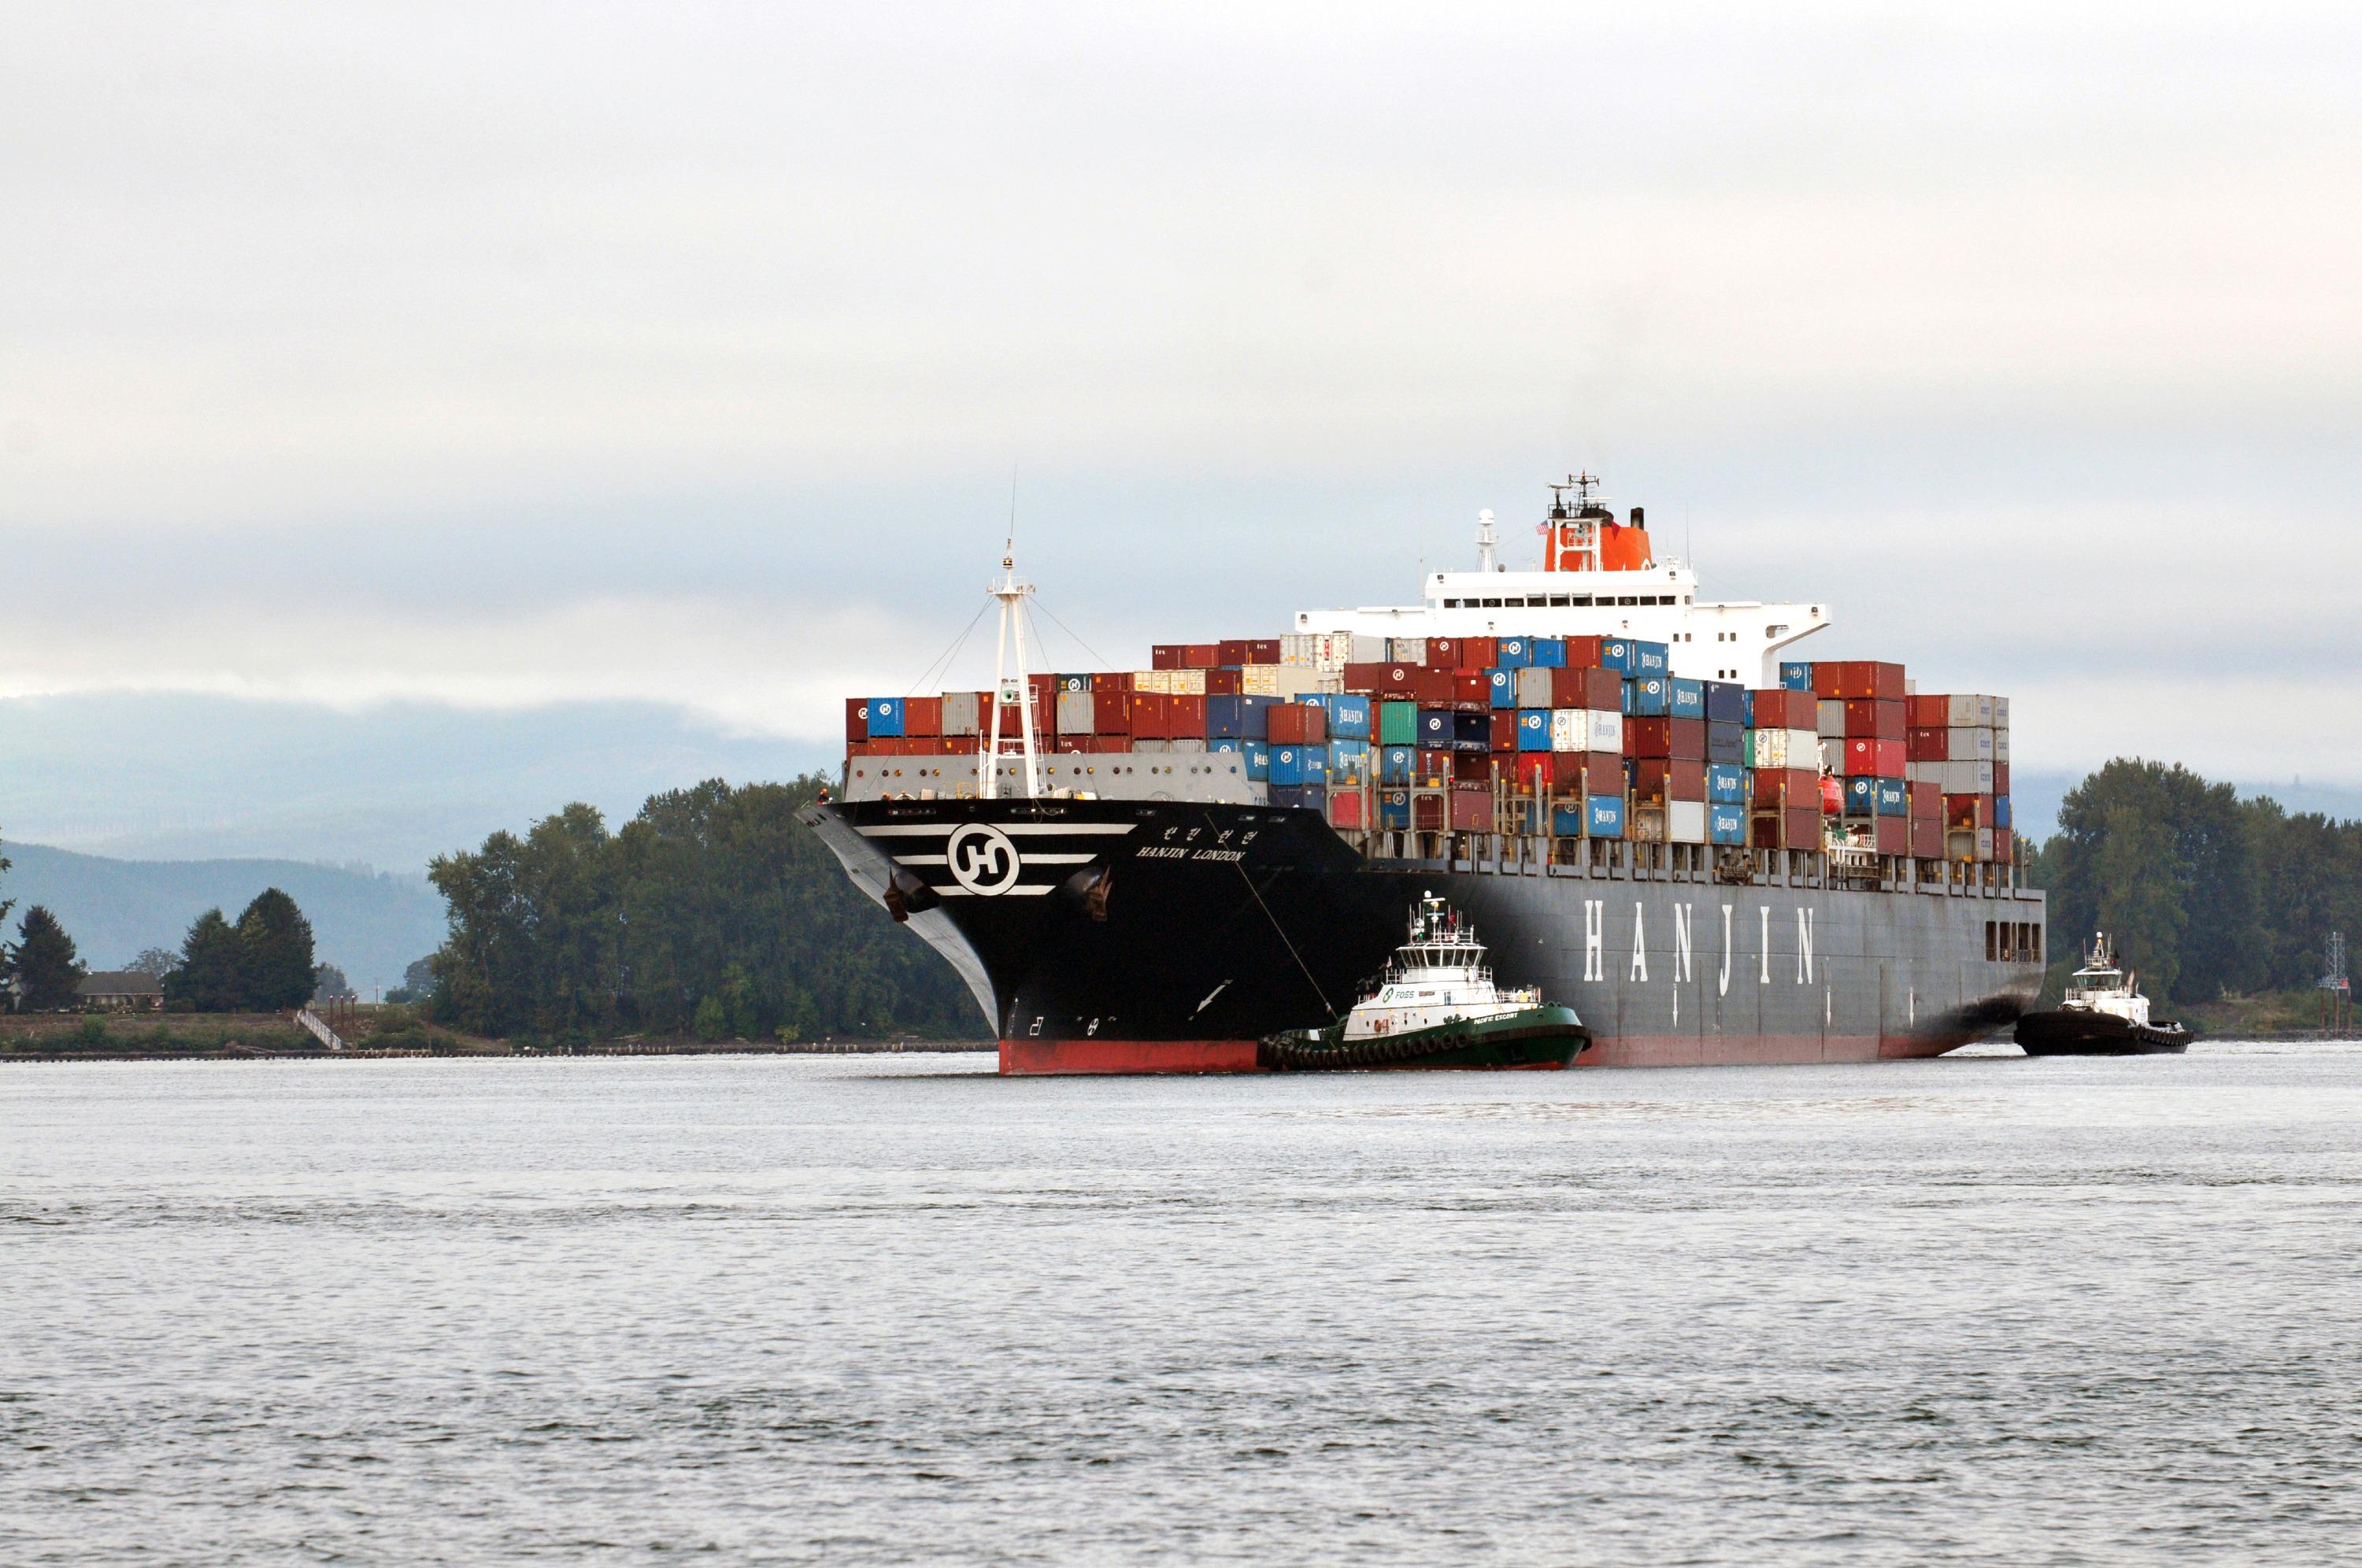 The Port of Portland Monday announced Hanjin's intention to stay at Terminal 6.